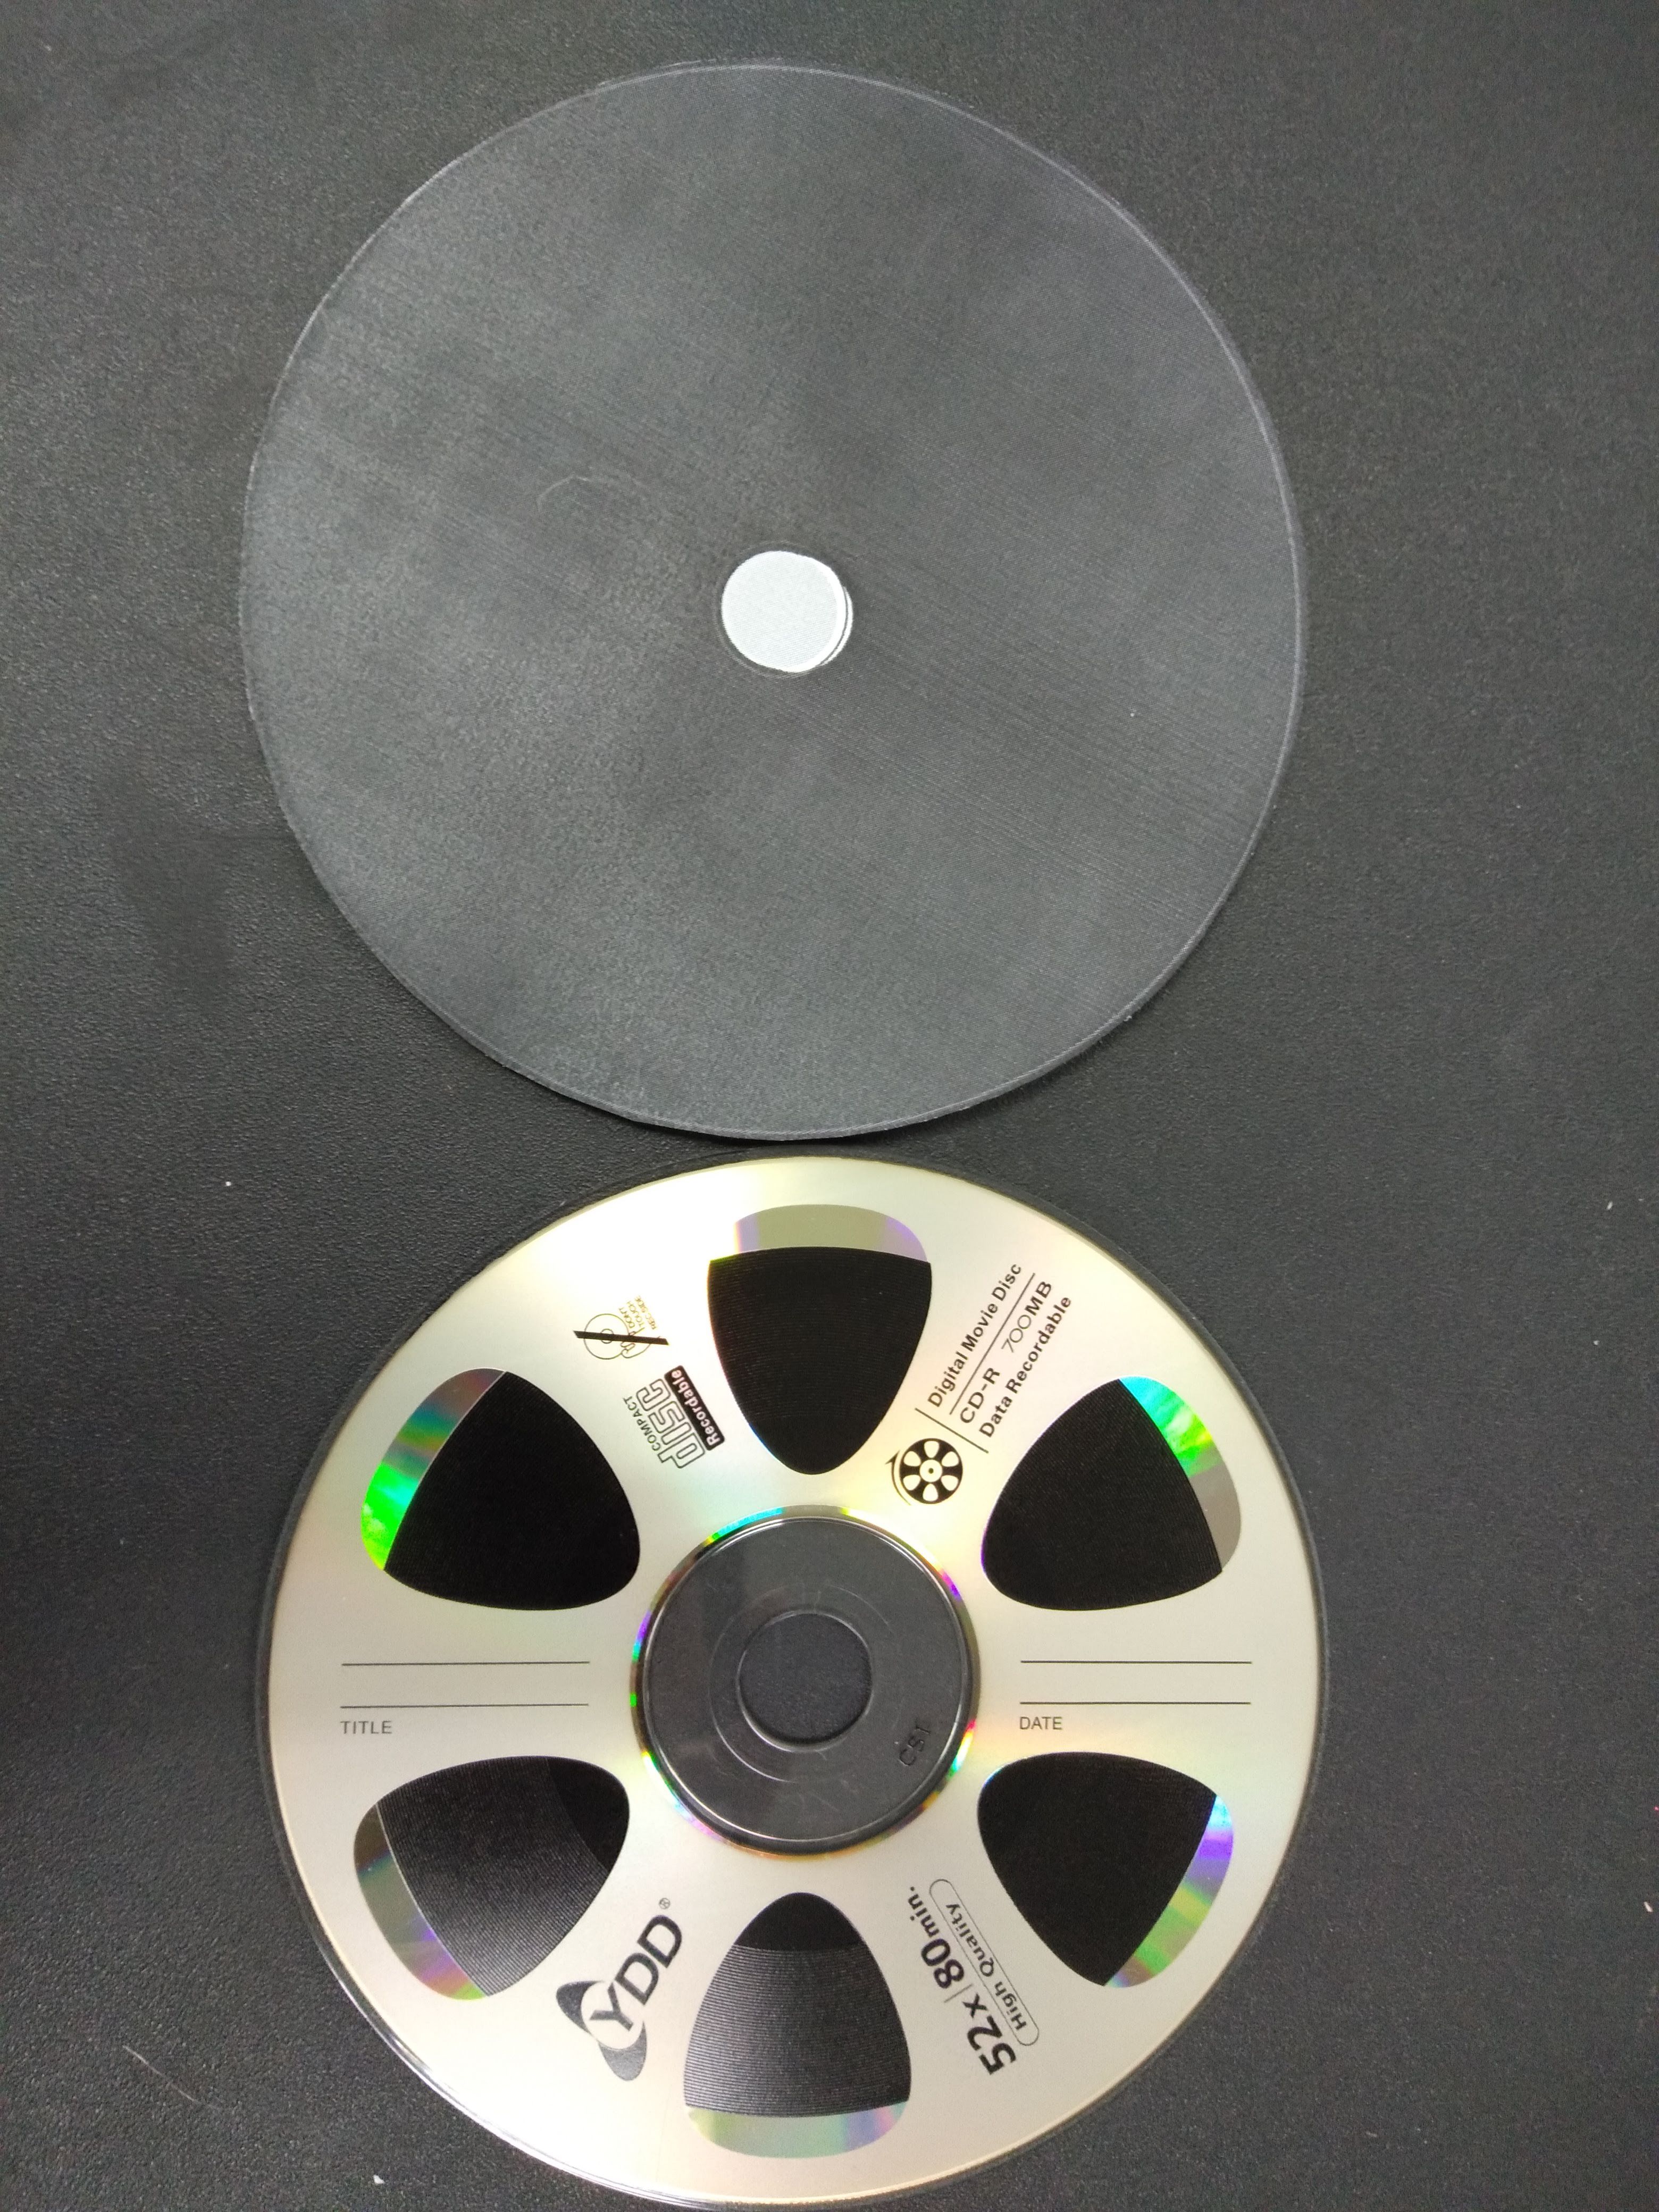 A standard size CD with a black printed label